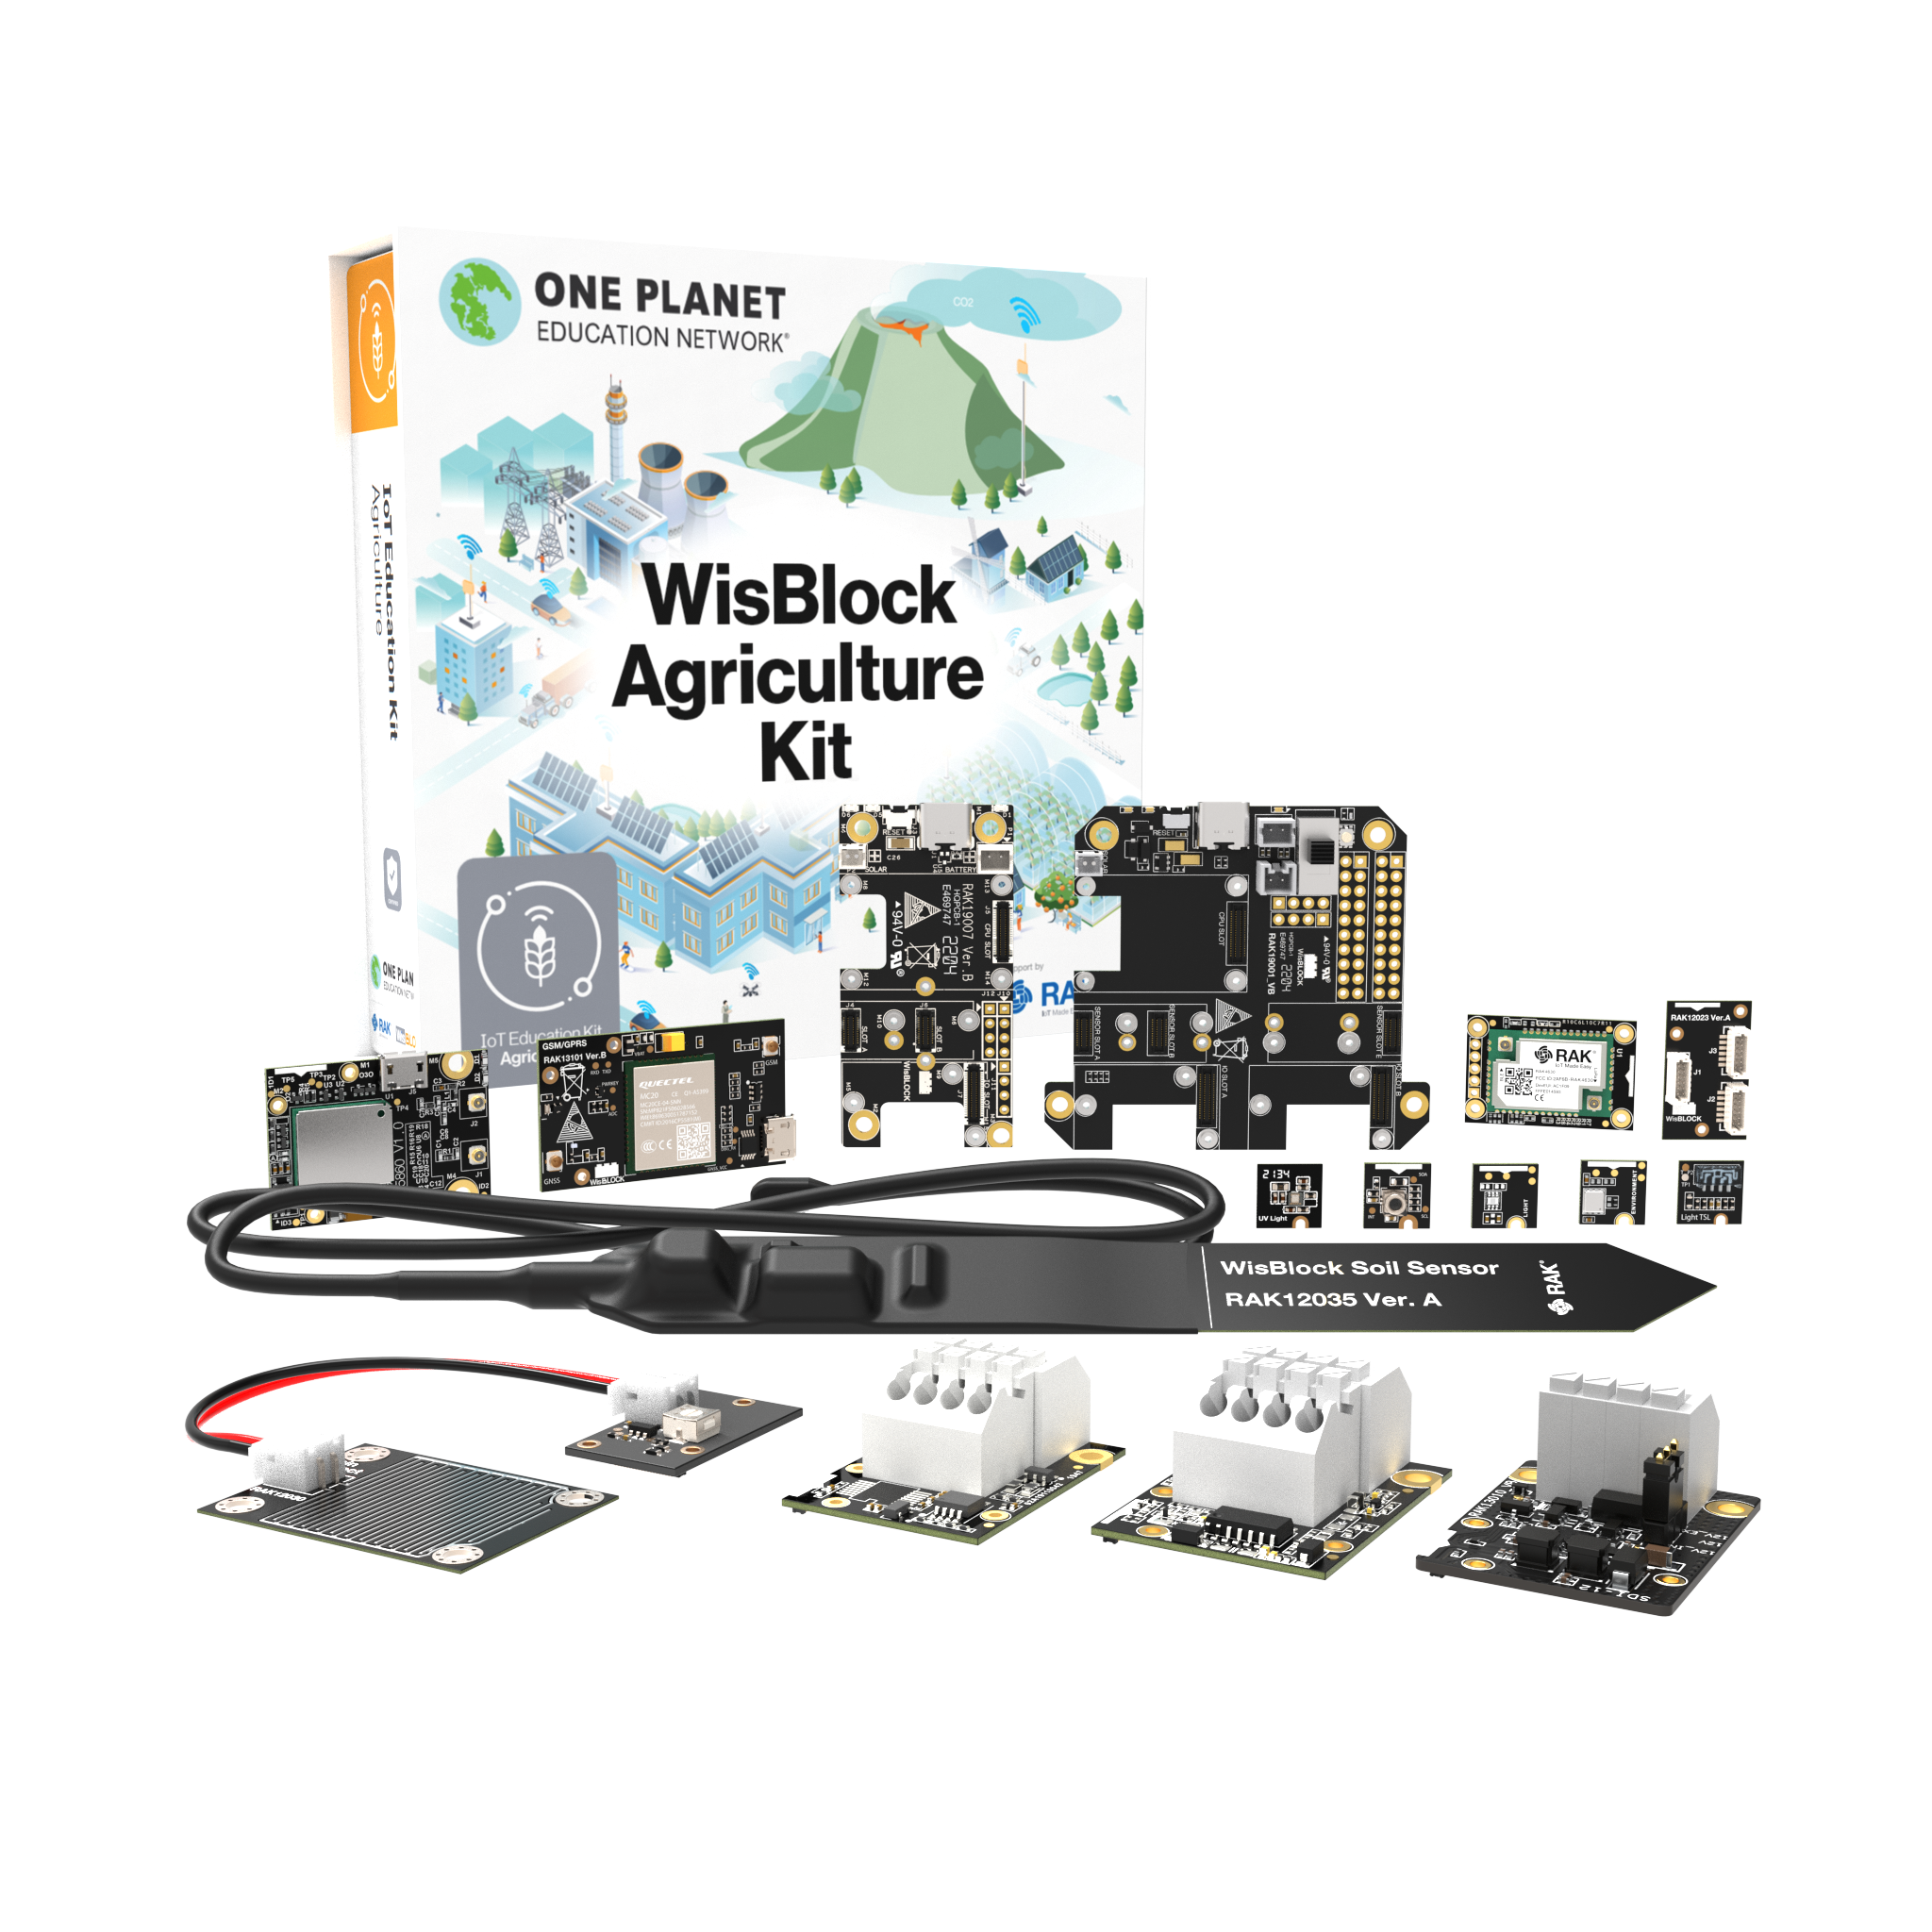 WisBlock Agriculture Kit